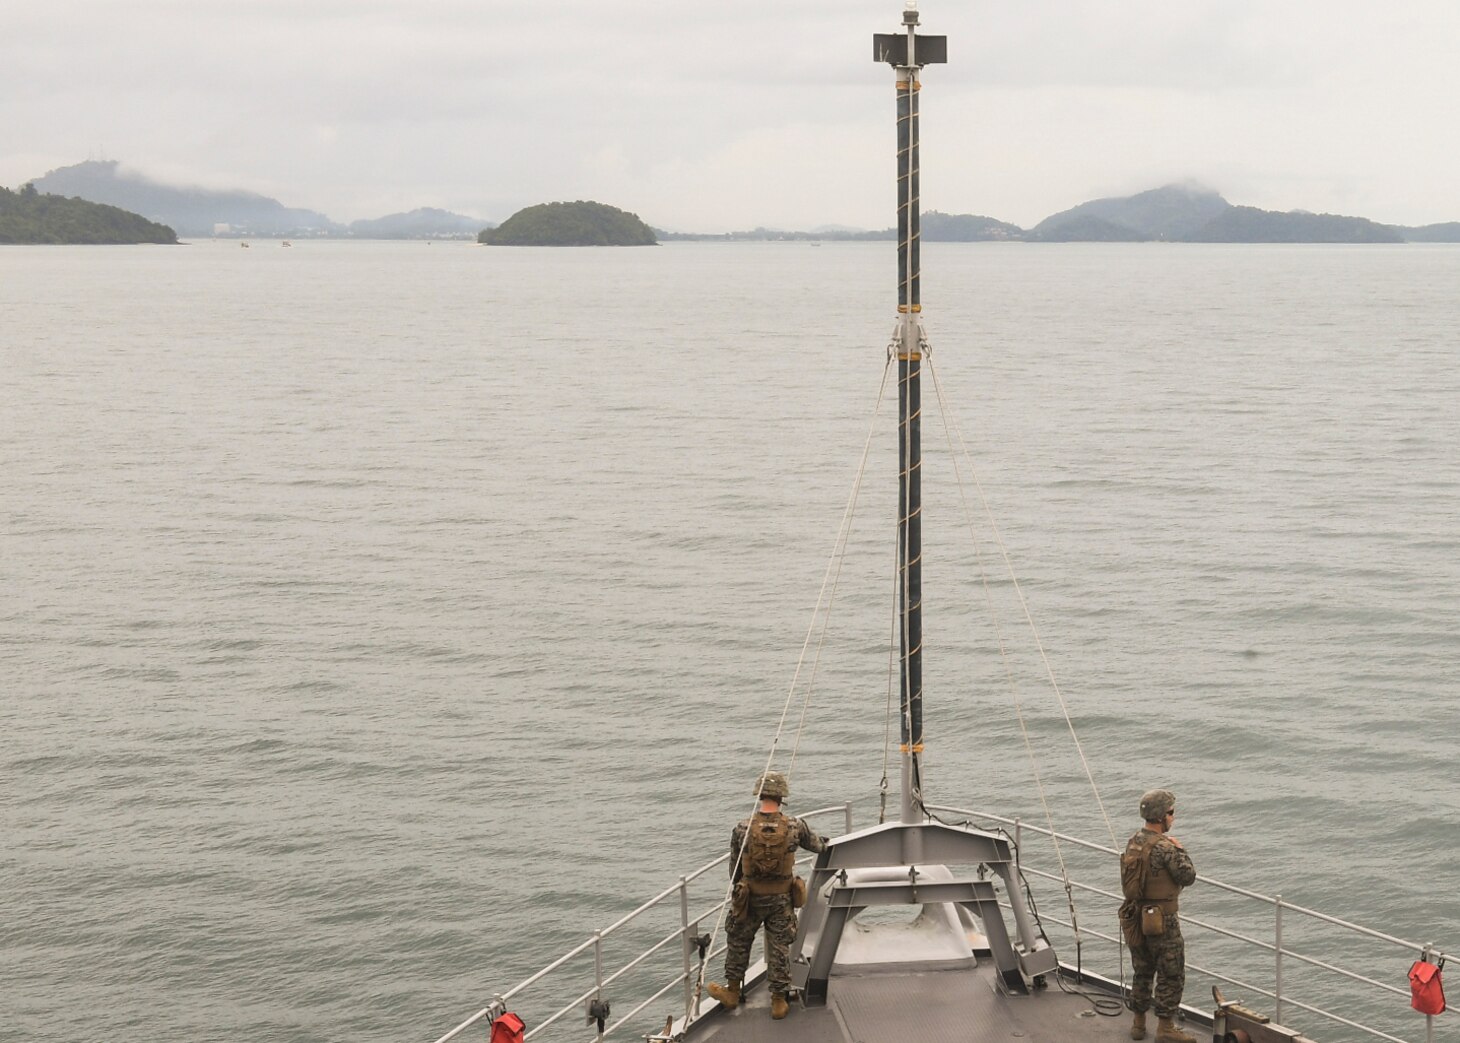 PHUKET, Thailand (Nov. 3, 2019) Marines, from 2nd Battalion, 2nd Marine Regiment, currently assigned to 3rd Marine Division, stand watch on the forecastle, as the Whidbey Island-class dock landing ship USS Germantown (LSD 42) prepares to anchor near Phuket, Thailand.  Germantown, part of Commander, Amphibious Squadron 11, is deployed to the Indo-Pacific region to enhance interoperability with partners and serve as a ready-response force for any type of contingency.